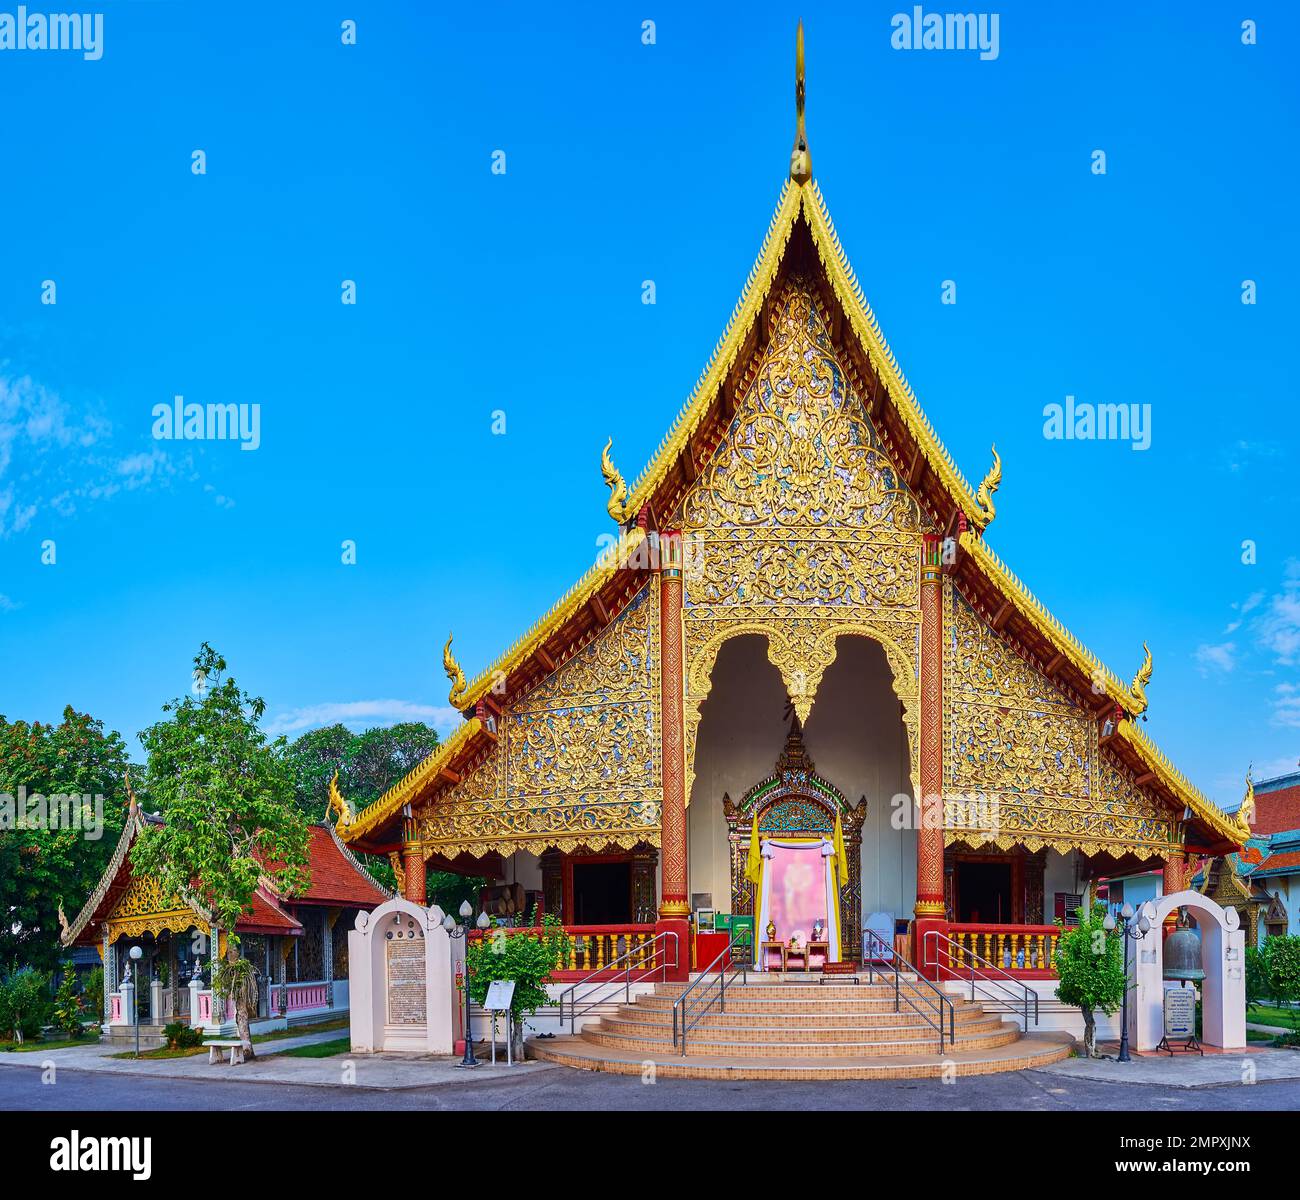 The scenic gilt floral patterns on the facade of the viharn in Wat Chiang Man temple, Chiang Mai, Thailand Stock Photo